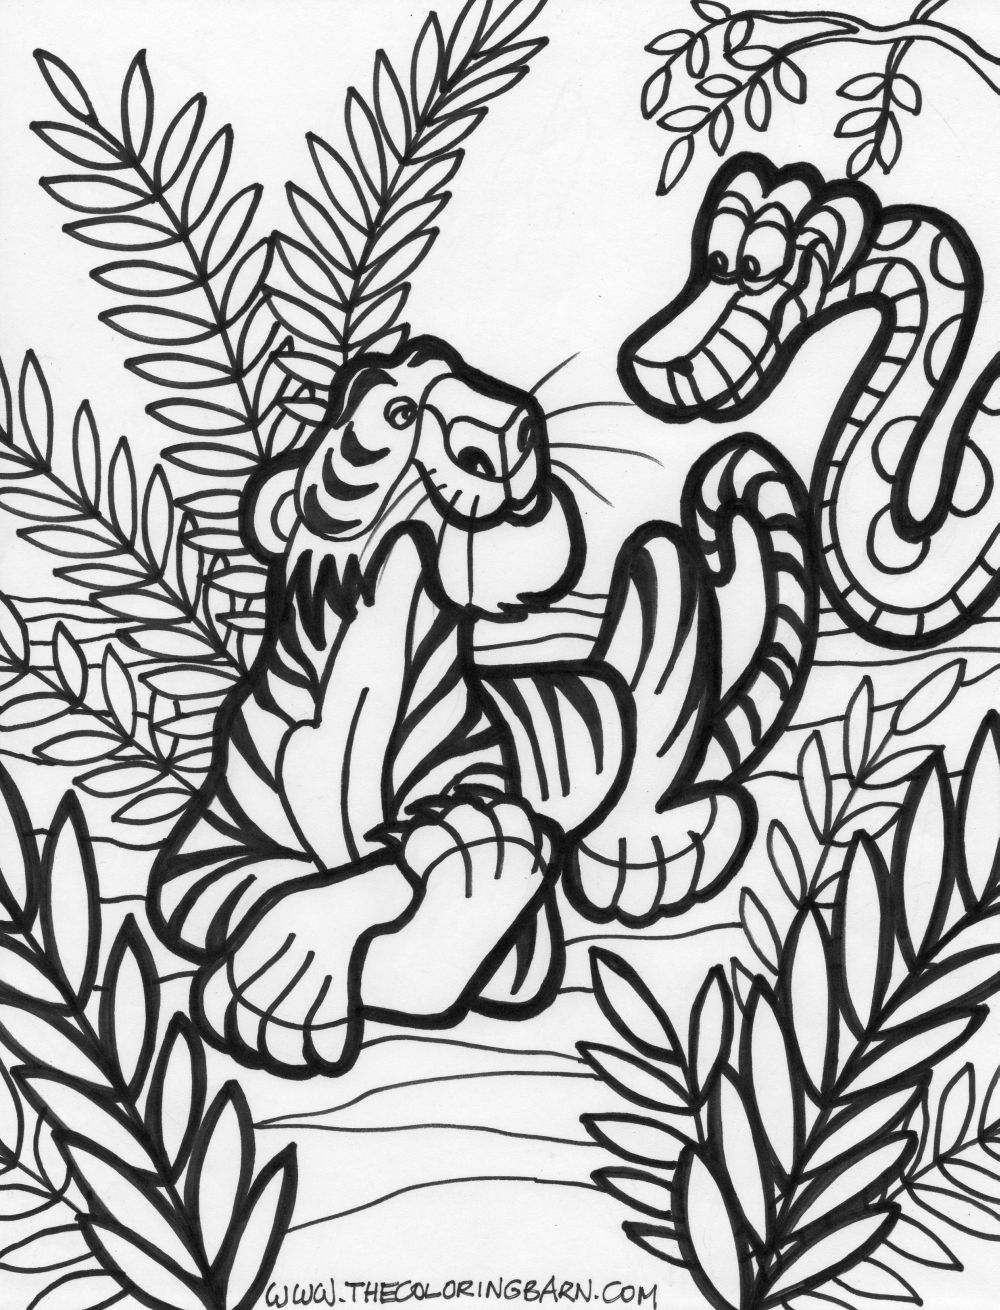 Printable Jungle Scene Coloring Pages - Coloring